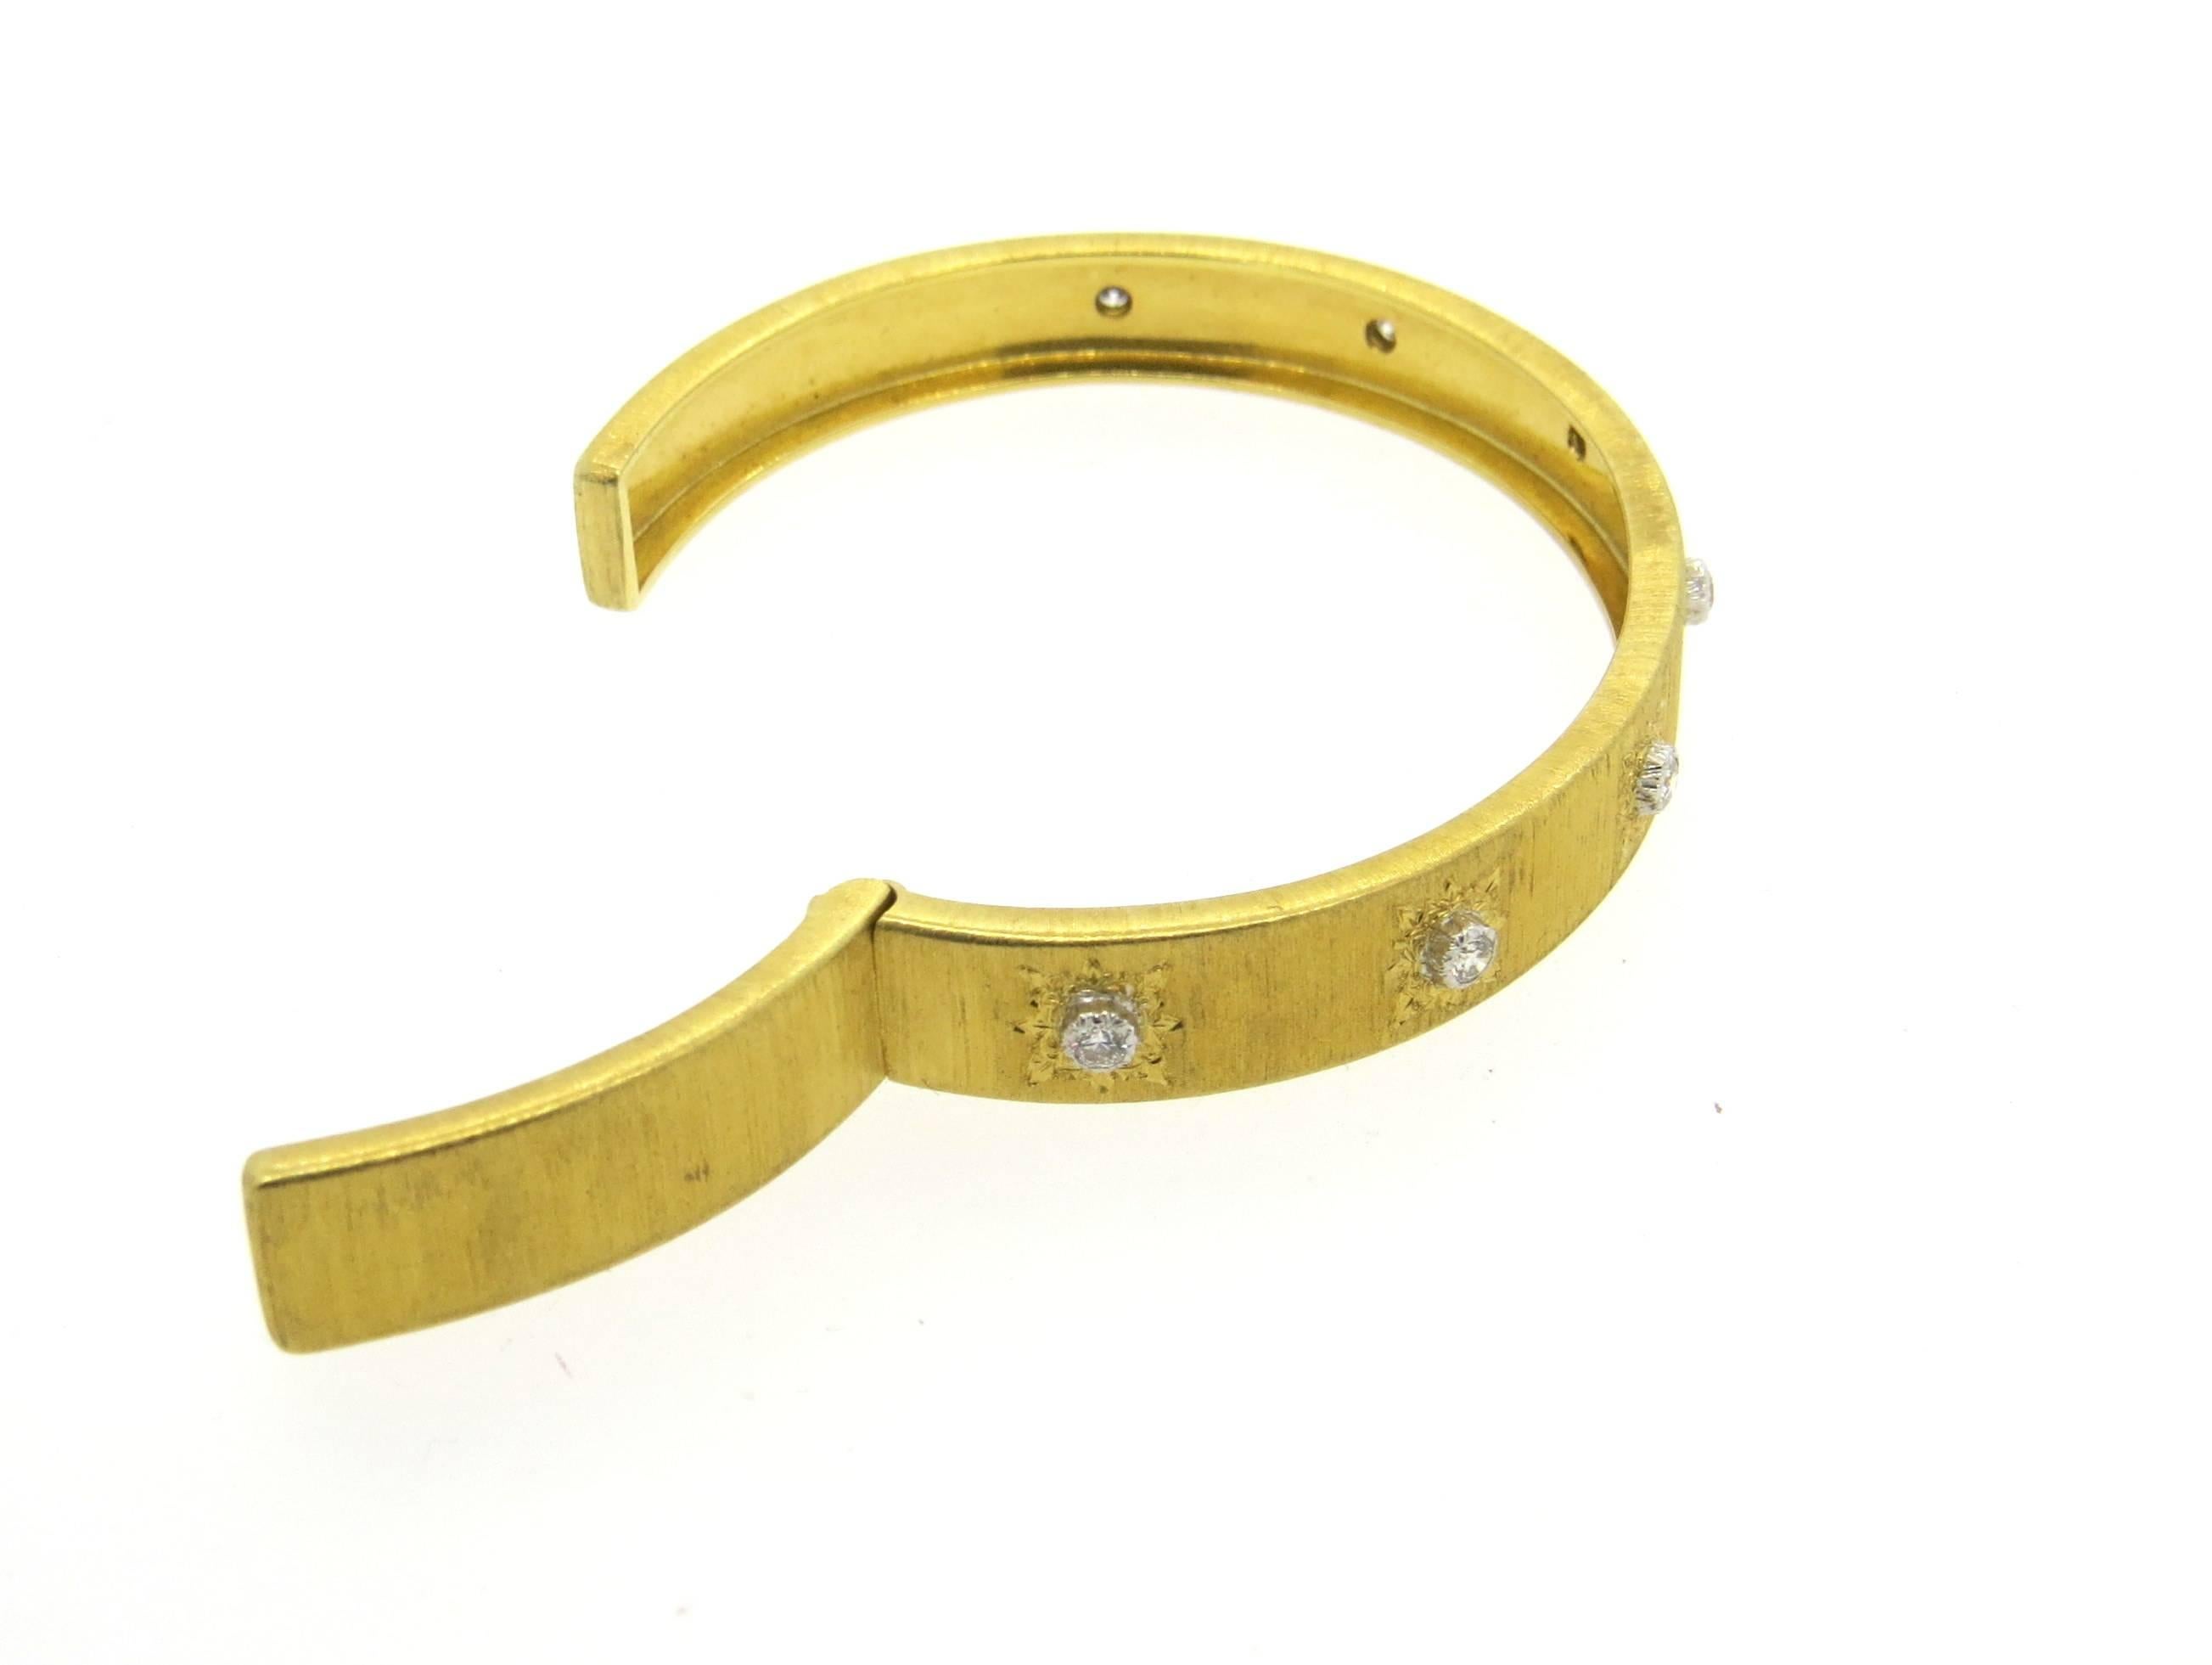 18k yellow gold classic cuff bracelet with hinge closure,  crafted by Buccellati, decorated with approximately 0.35ctw in H/VS diamonds. Bracelet will comfortably fit up to 7